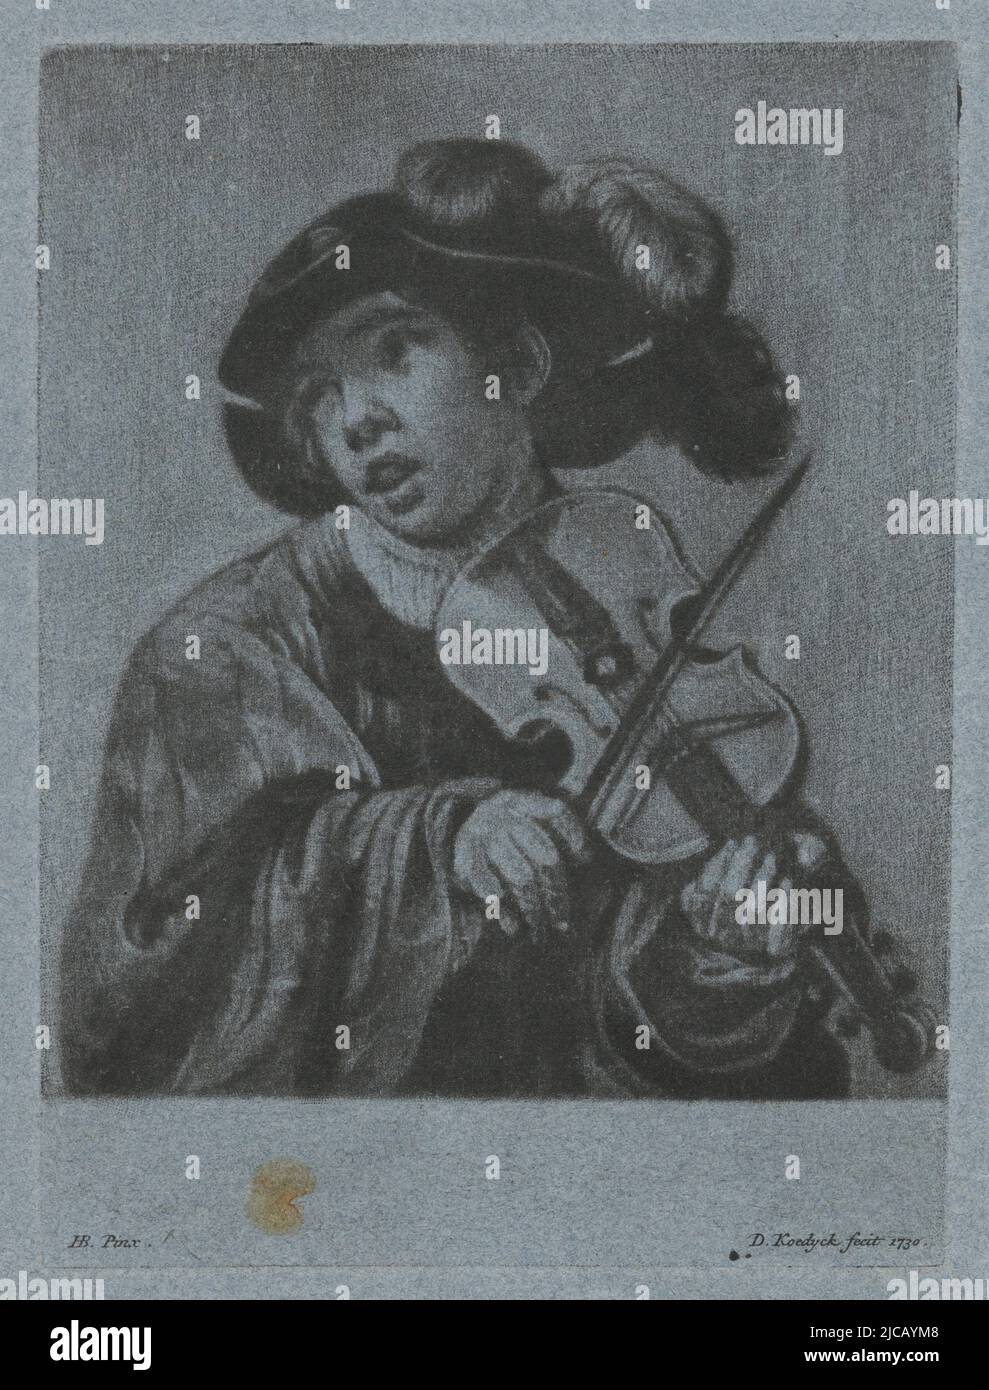 A boy, wearing a feathered hat on his head, plays a violin, Violin Player, print maker: Dirk Koedijck, (mentioned on object), after: Hendrick ter Brugghen, (mentioned on object), Zaandam, 1730, paper, h 168 mm × w 125 mm Stock Photo